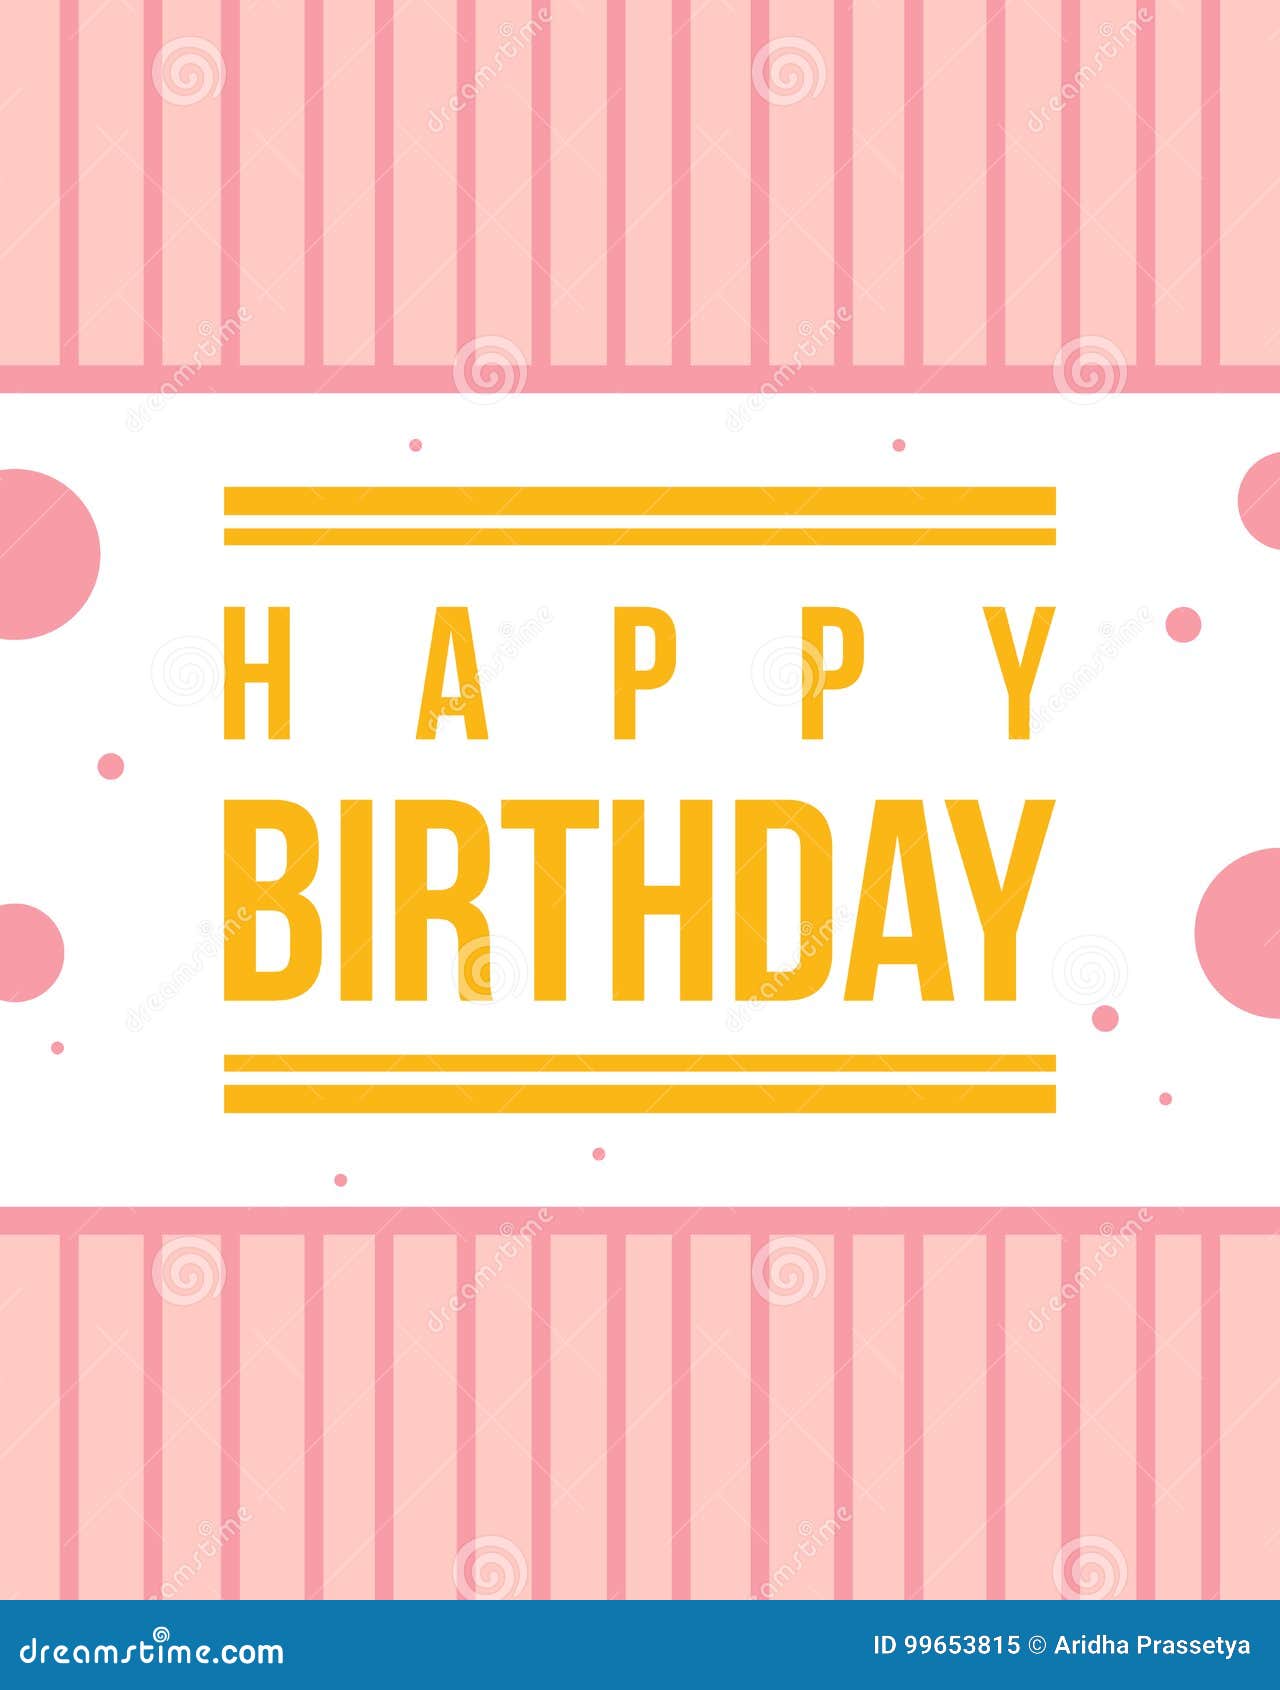 Happy Birthday Greeting Card Style Stock Vector - Illustration of event ...